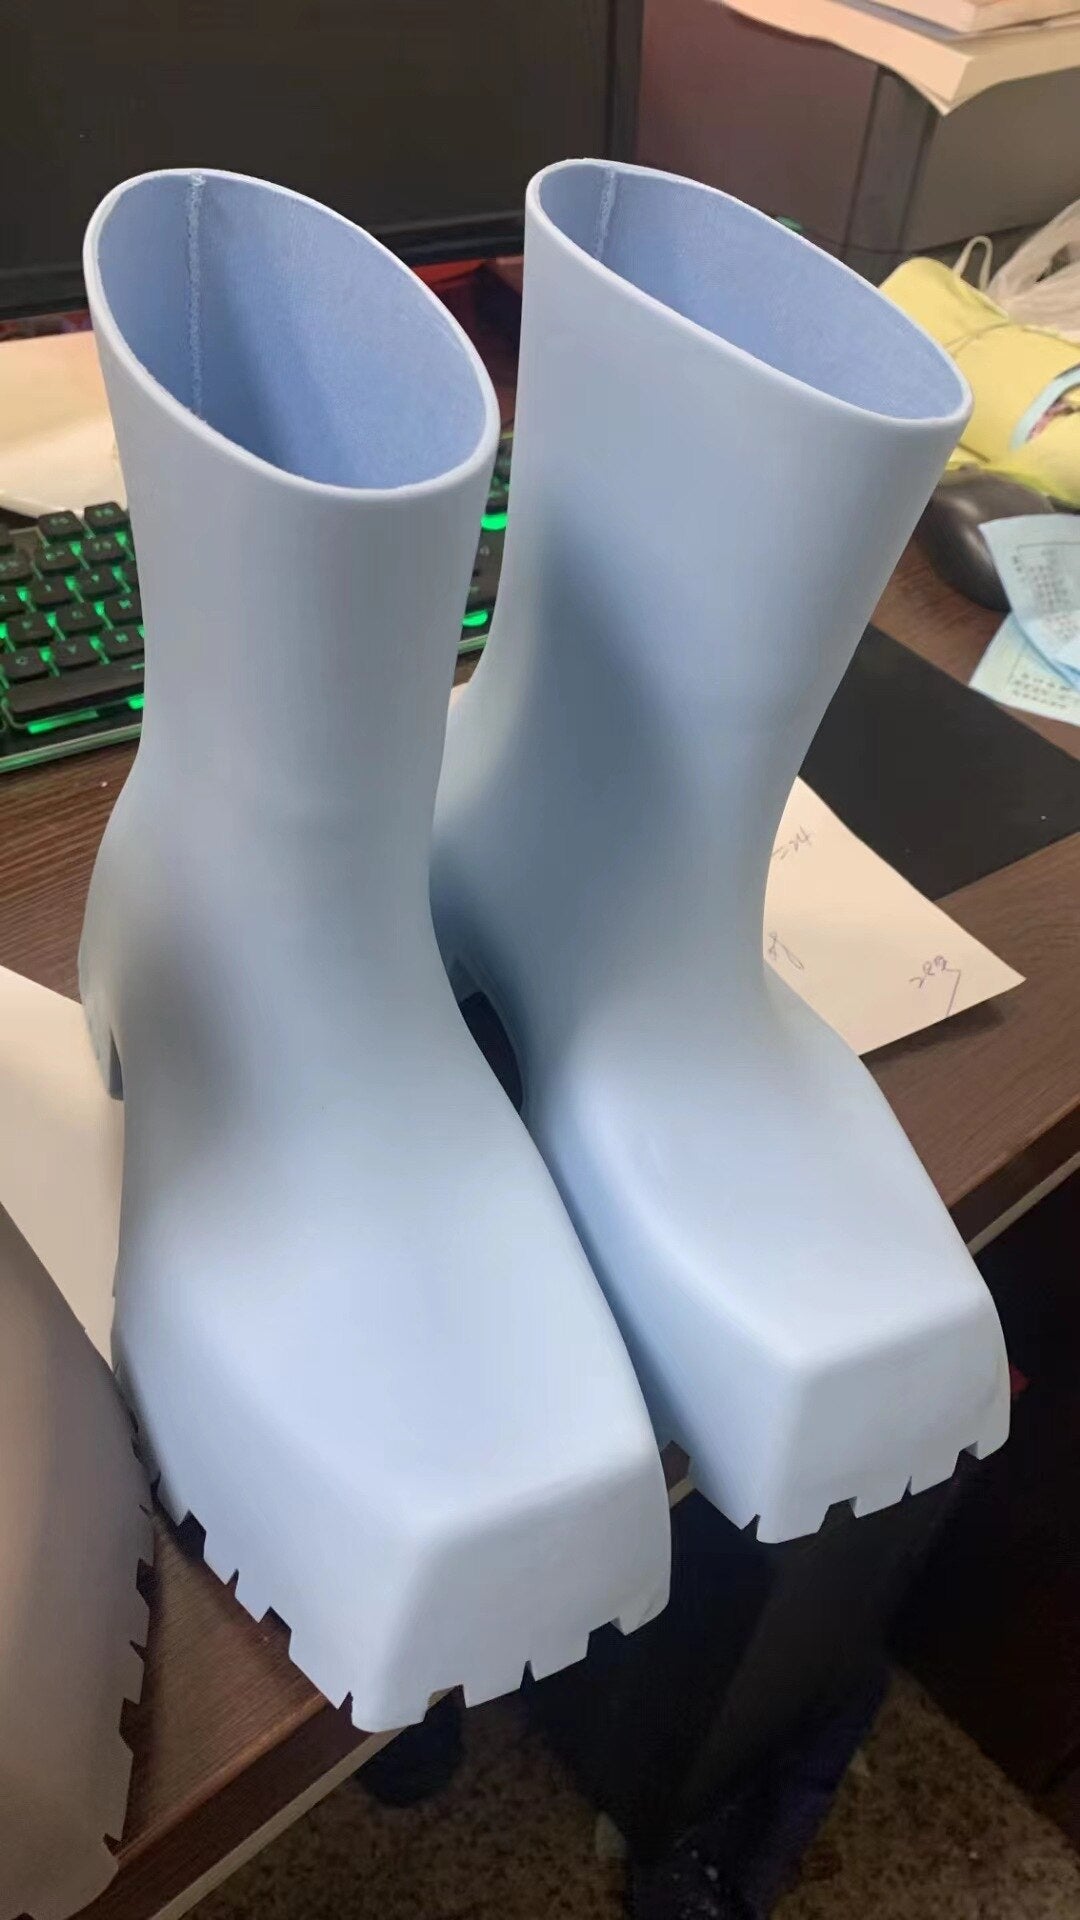 Rain boots simple solid color waterproof boots fashion PVC one-piece Boots Black Leather Rhinestone boots